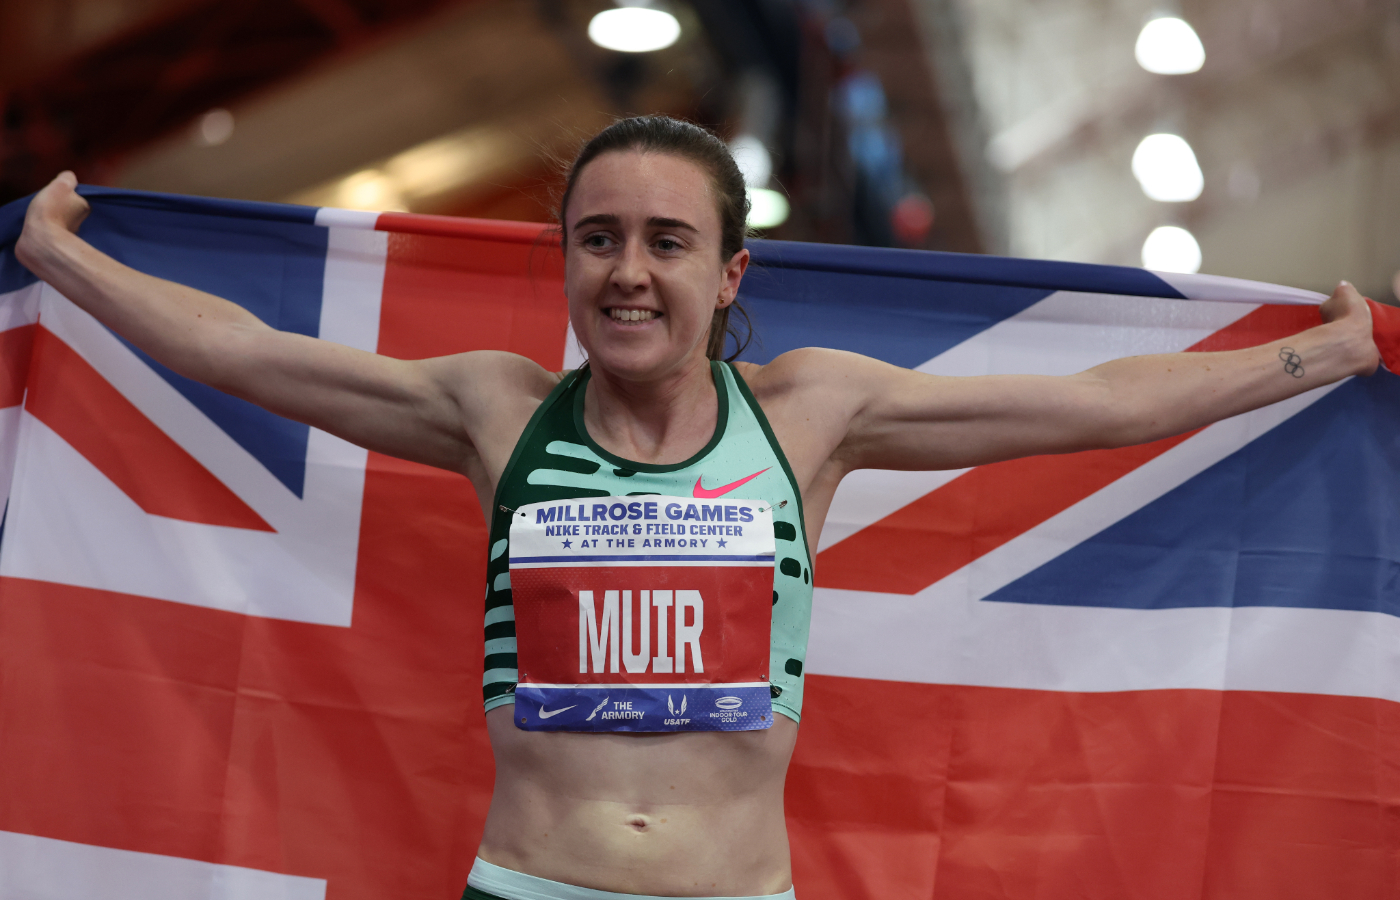 Laura Muir at the Millrose Games in New York.